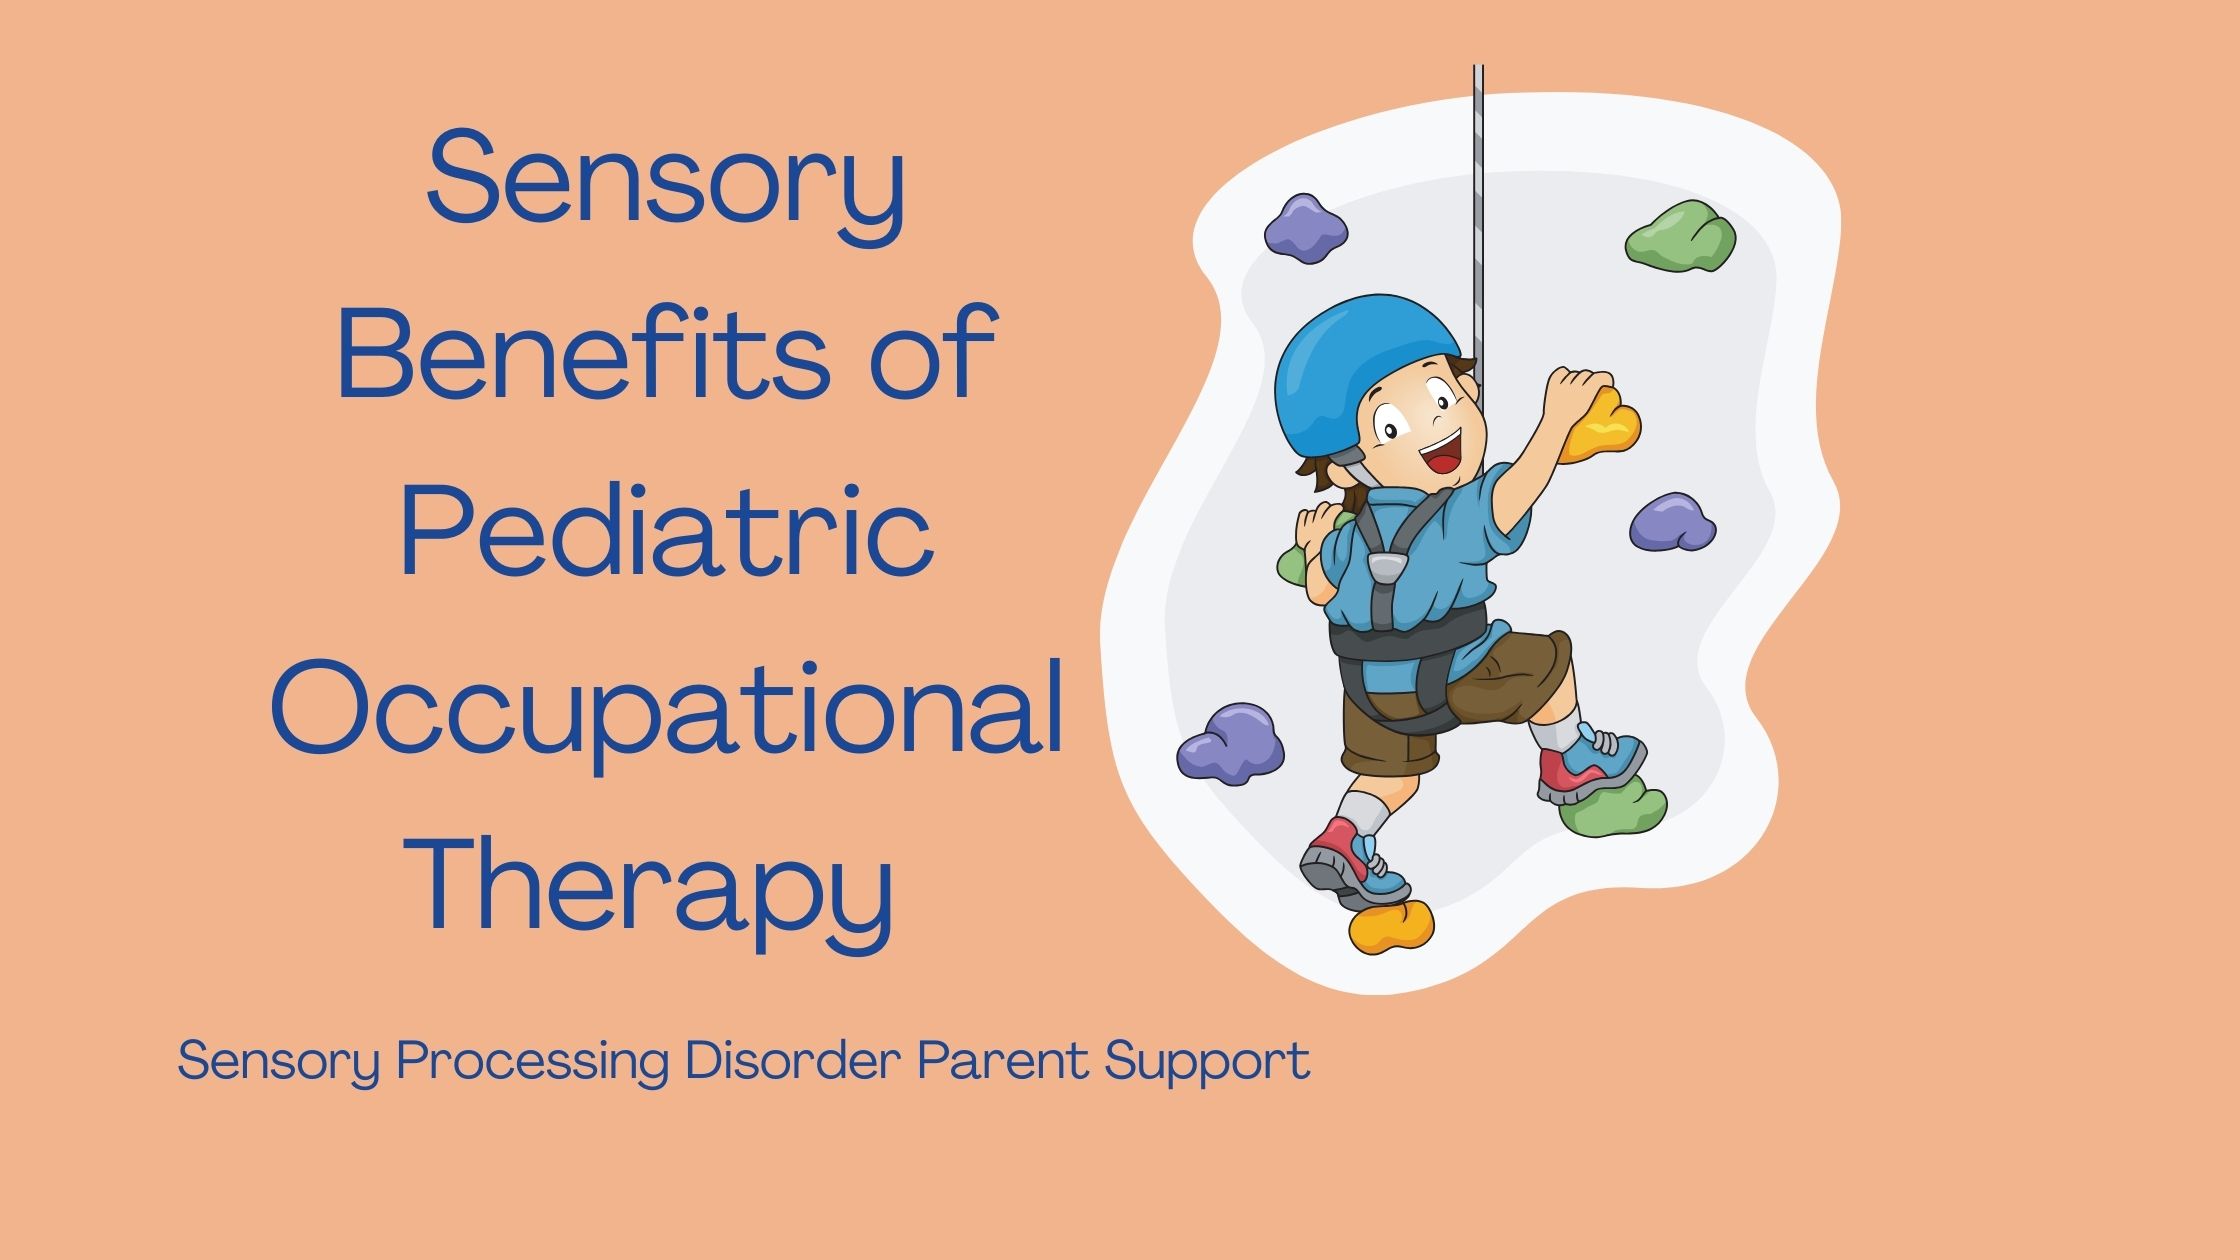 autistic child with sensory processing disorder climbing climbing wall in therapy Sensory Benefits of Pediatric Occupational Therapy